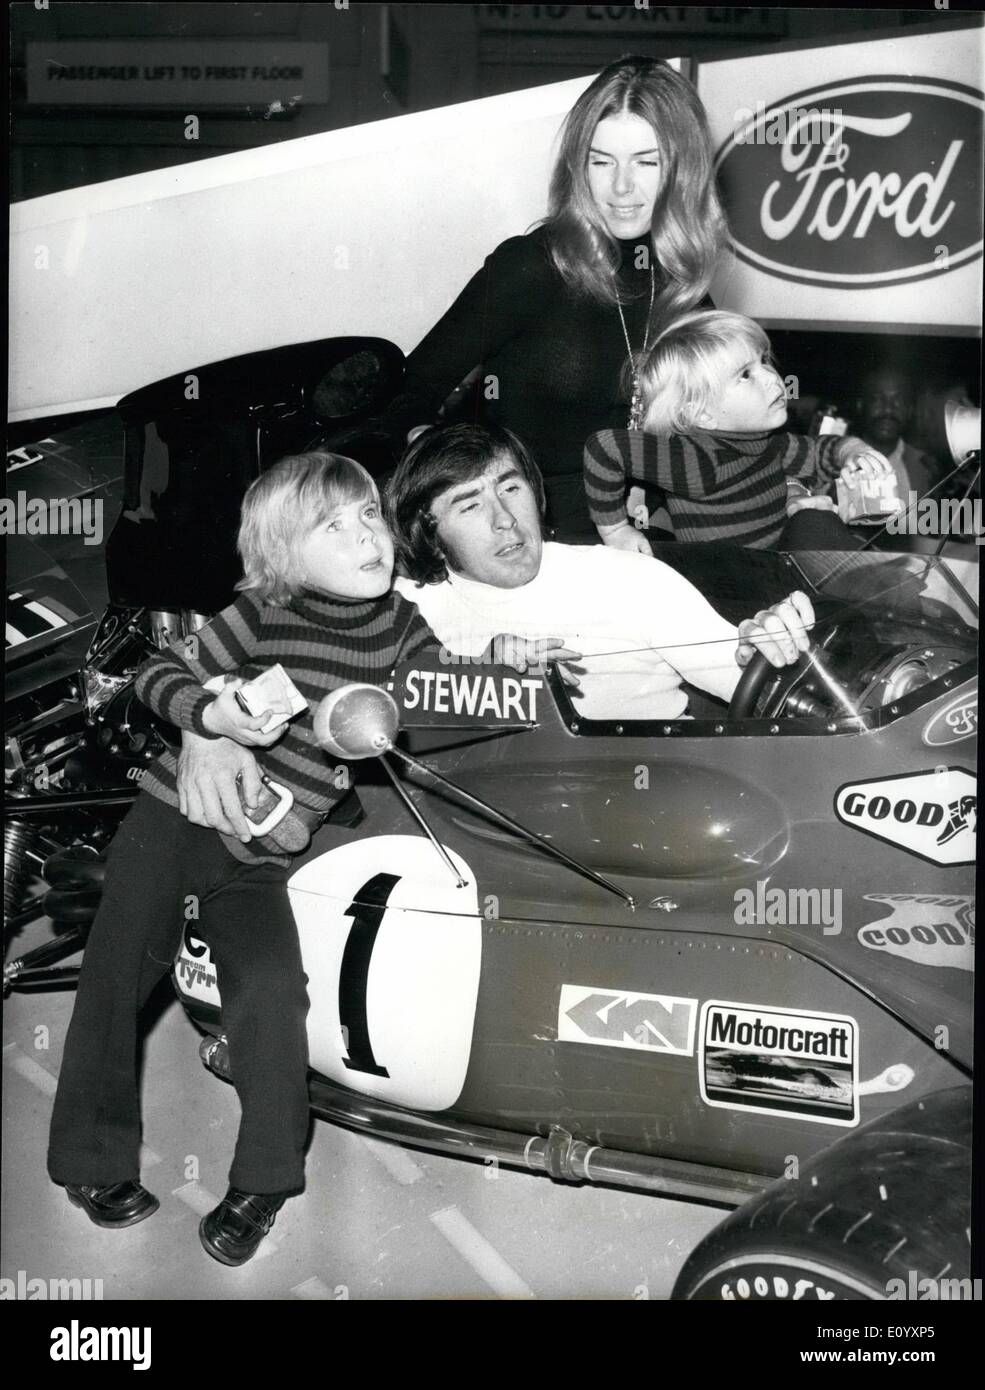 Oct. 10, 1971 - Opening of the Motor Show; The 1971 Motor Show was opened today at Earls Court by Princess Alexandra Photo Shows Jackie Stewart, the world champion racing driver, with his wife Helen and sons Paul (eldest) and Mark, pictured with his championship winning Tyrrell Ford car at the show. Stock Photo